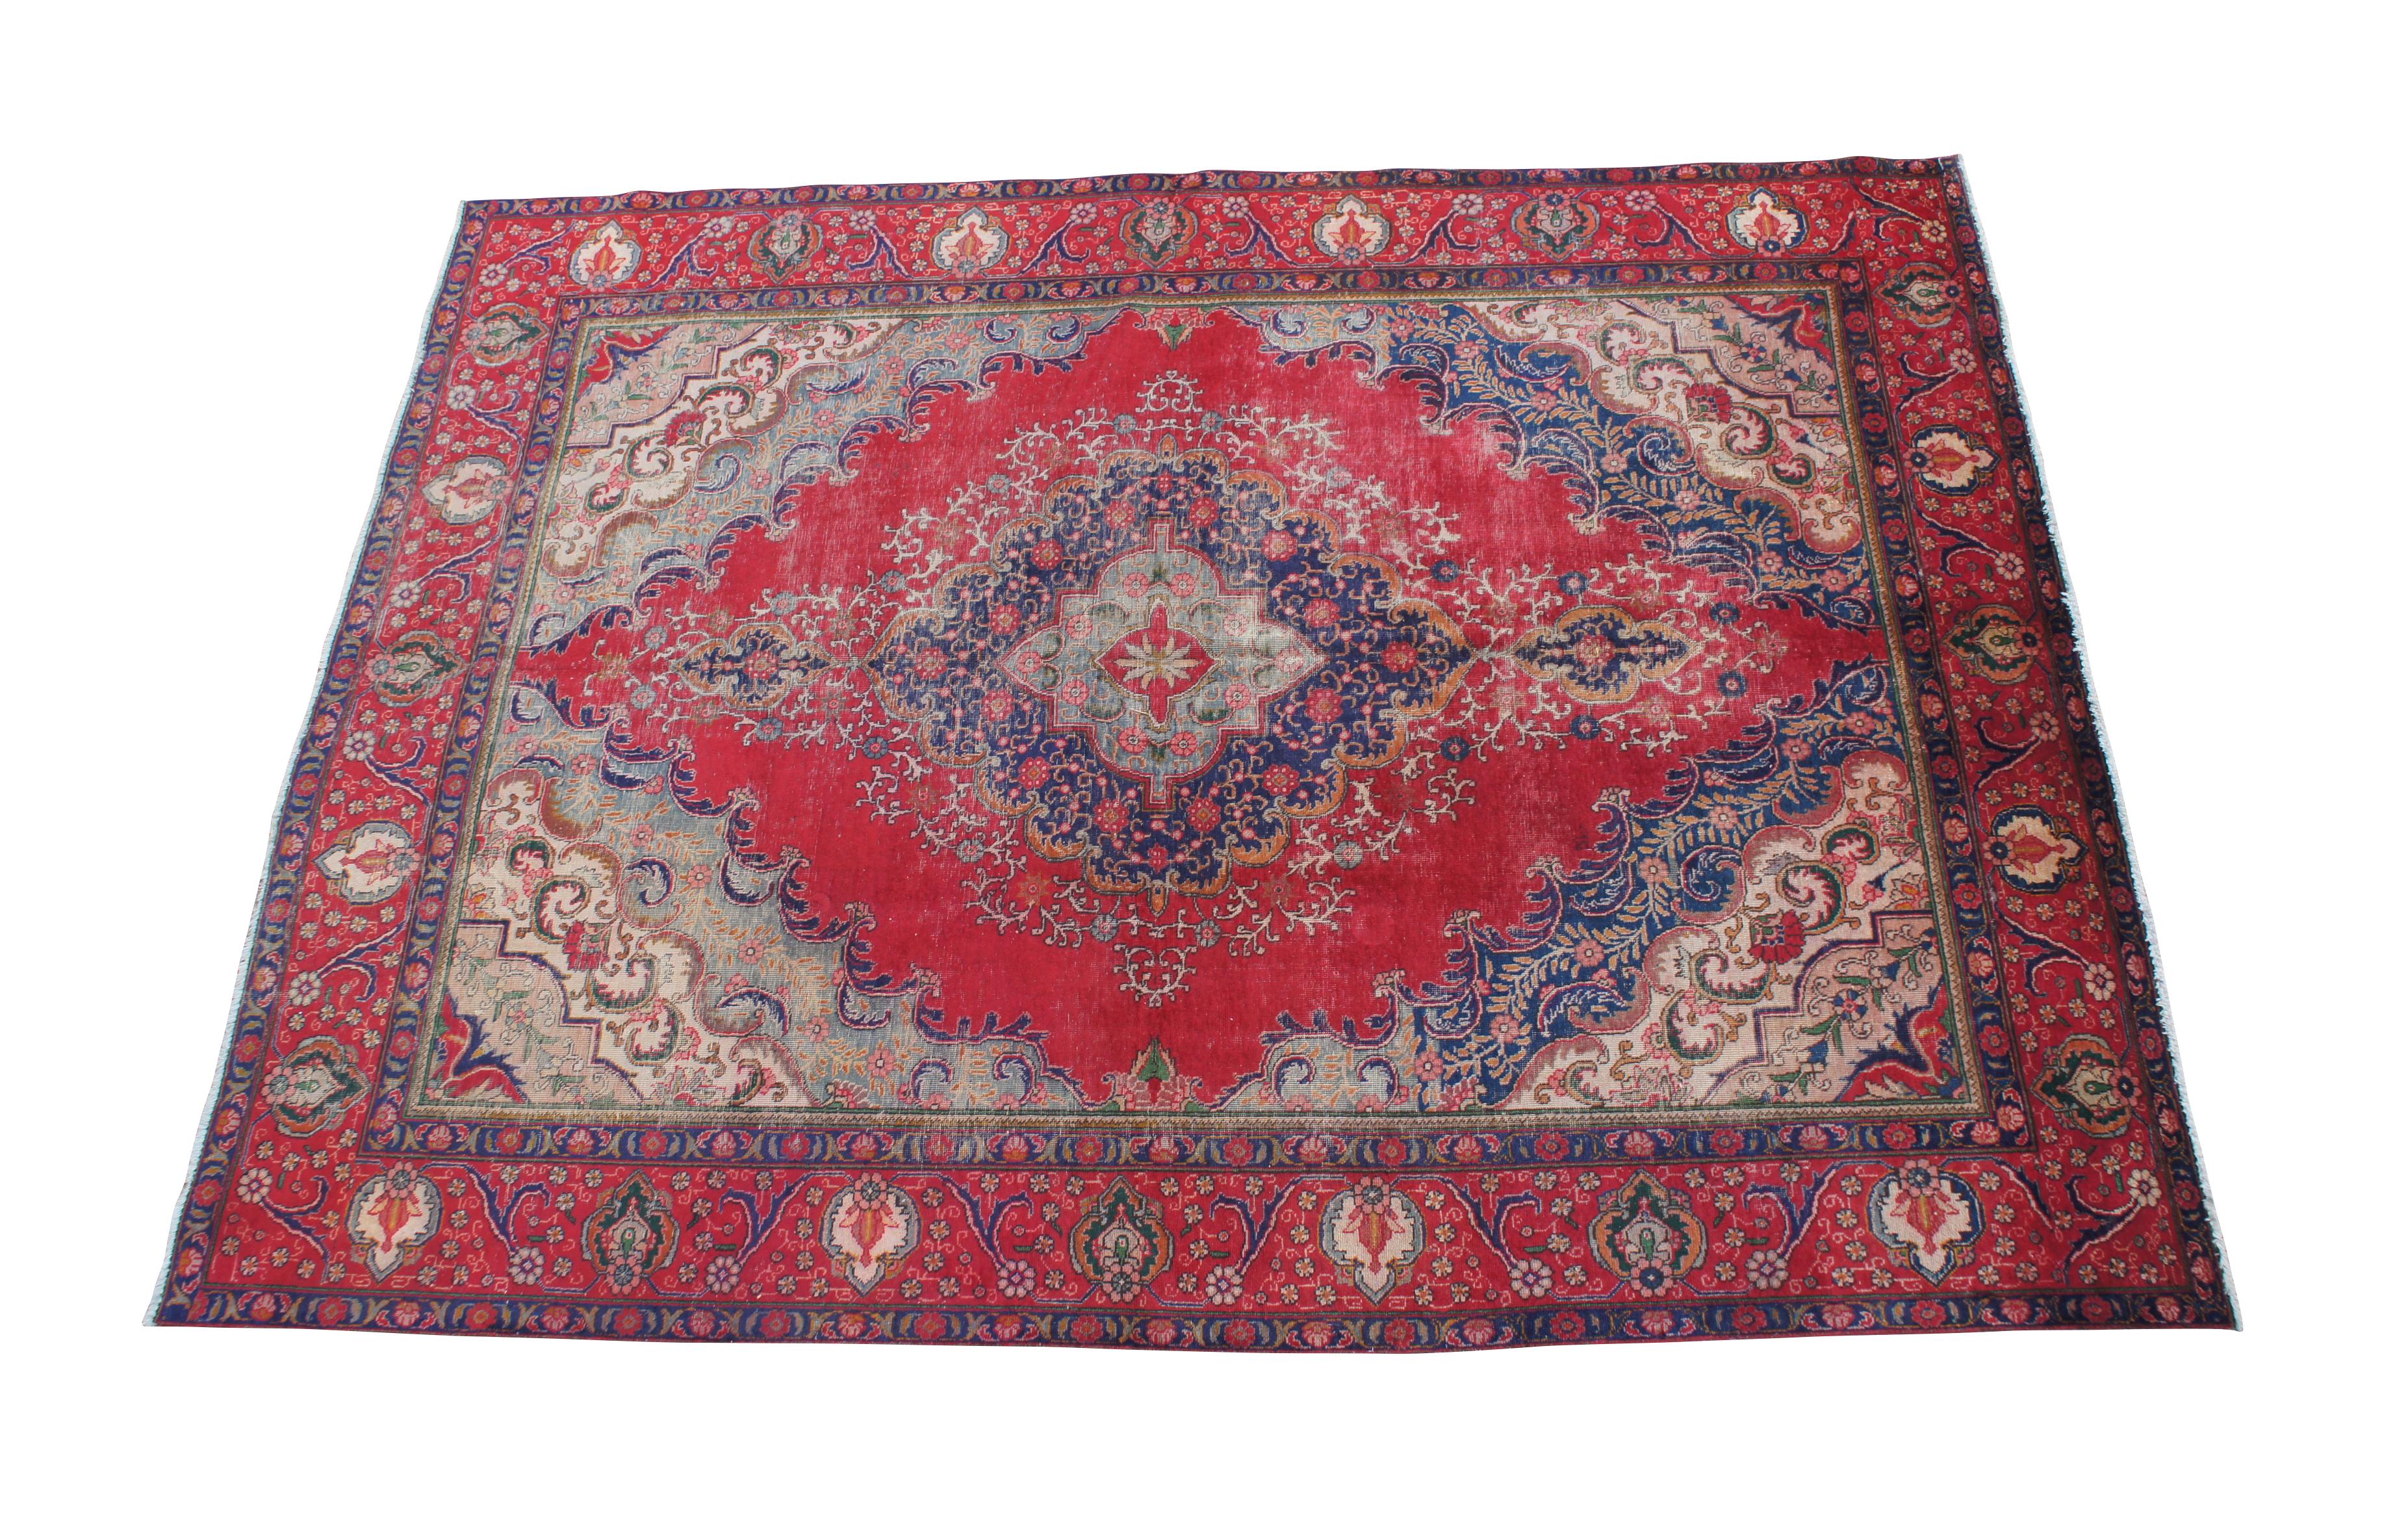 Very Fine wool oriental area rug from the second half of the 20th century.  Hand knotted from wool with exquisite layered medallion and foliate detail throughout. Includes shades of red, blue, green, pink, beige and orange.  196 kpsi

Persian Tabriz